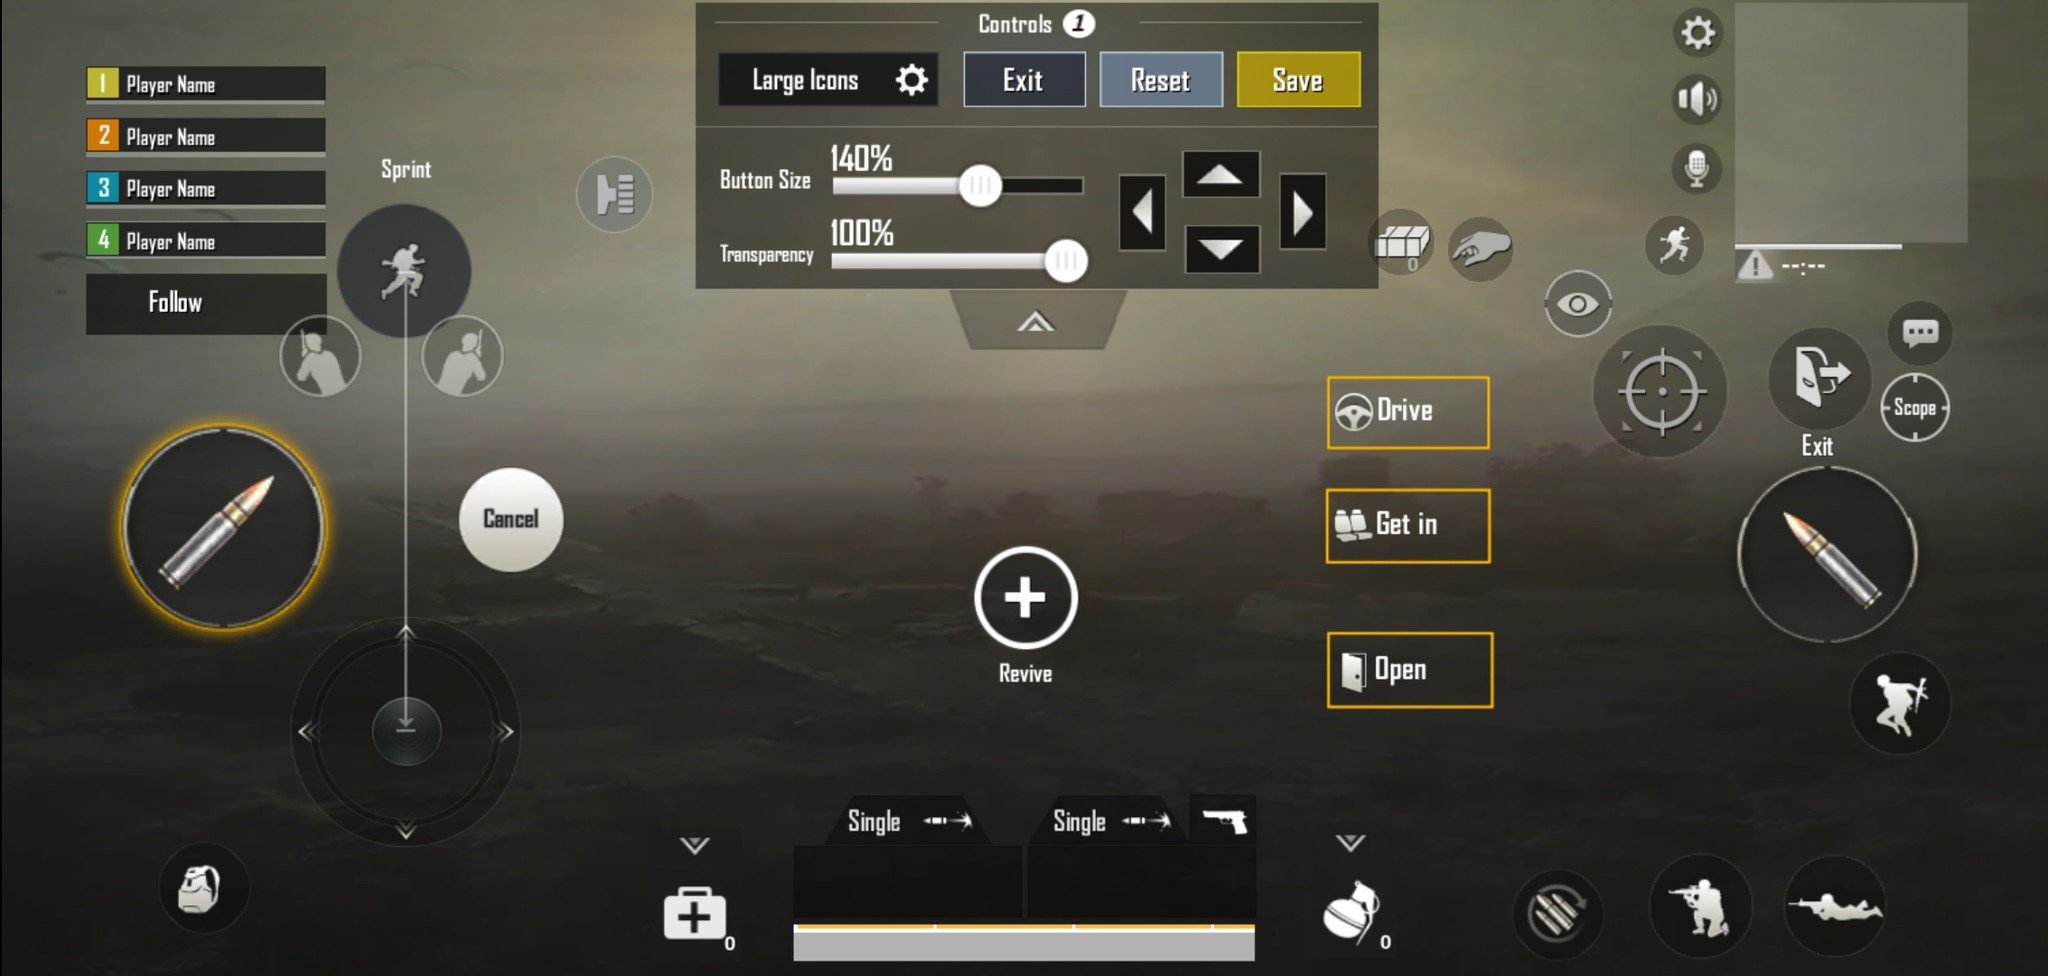 Best Advanced Touchscreen Controls For Pubg Mobile Android Central - pubg mobile offers complete customization for all touchscreen controls along with the ability to change and tweak everything on the fly which is great